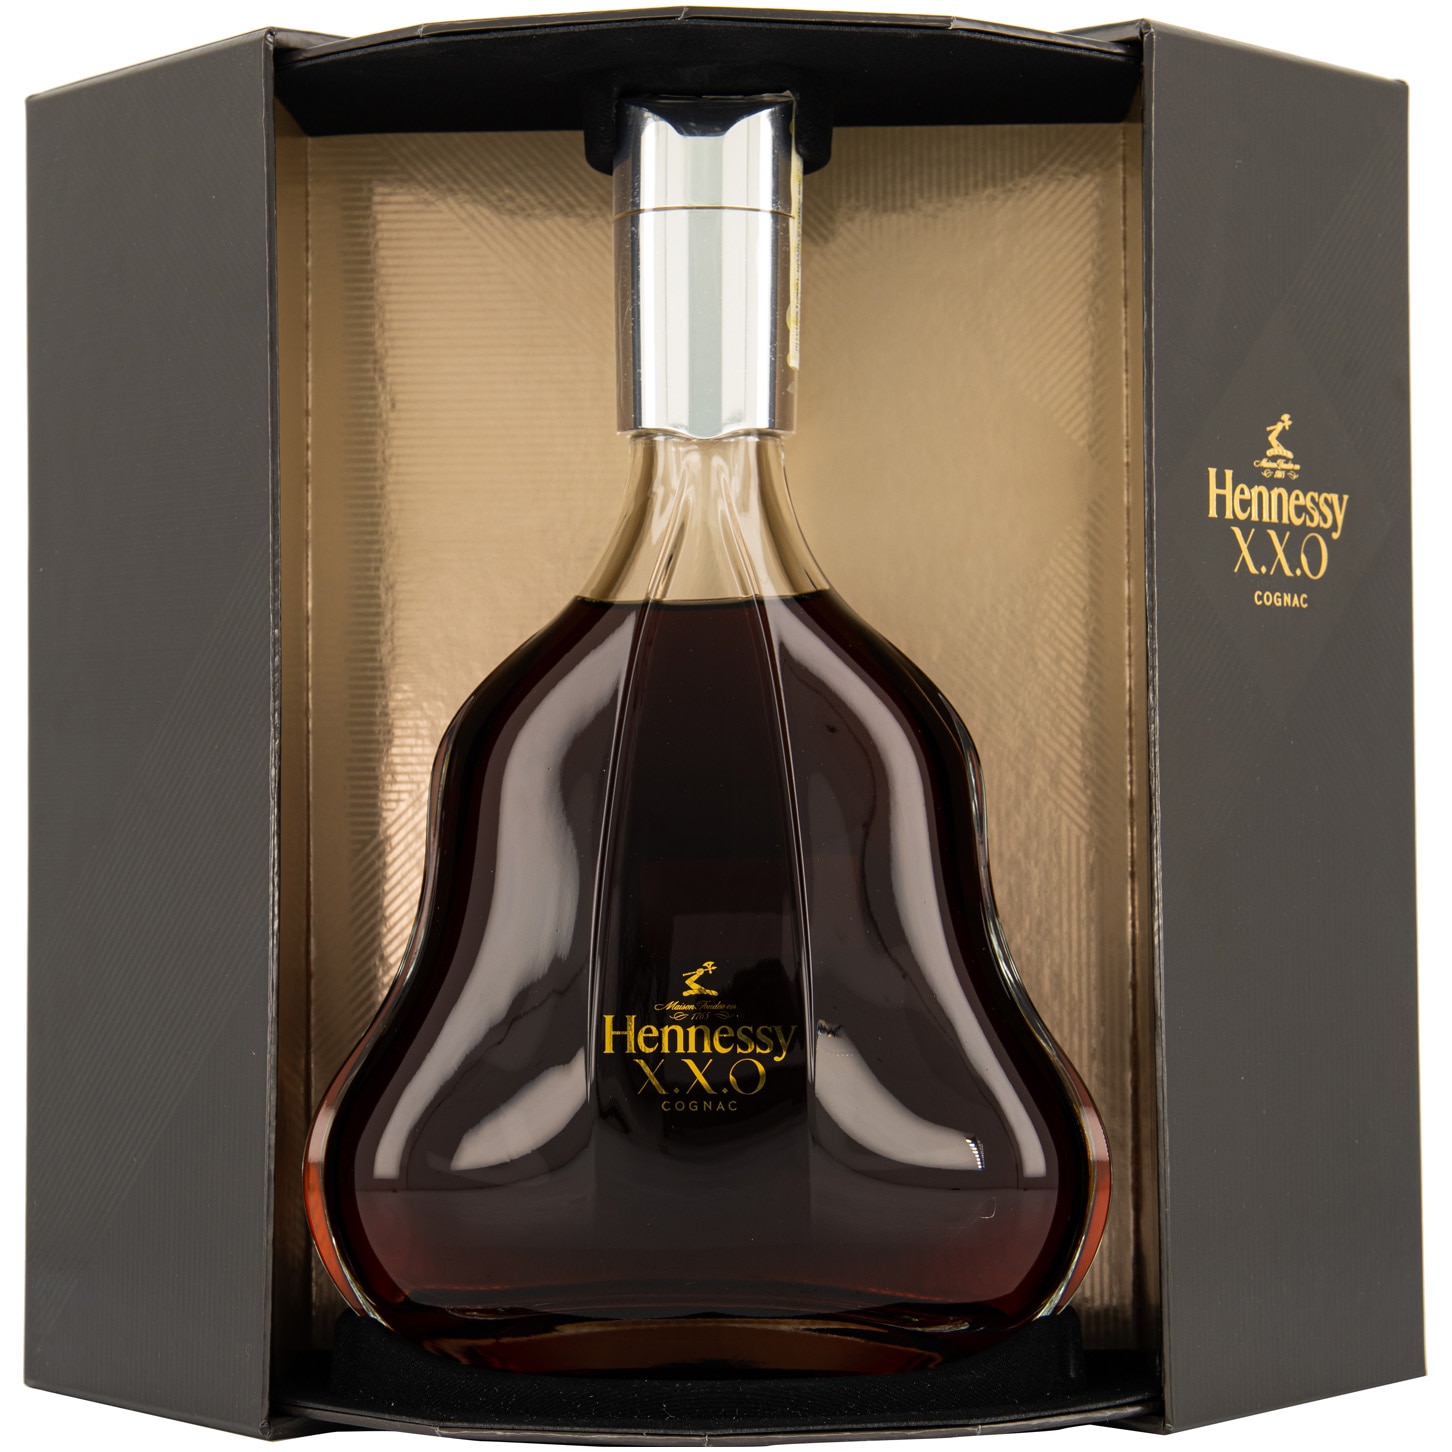 Coniac Hennessy XXO, 40%, 1l - eMAG.ro